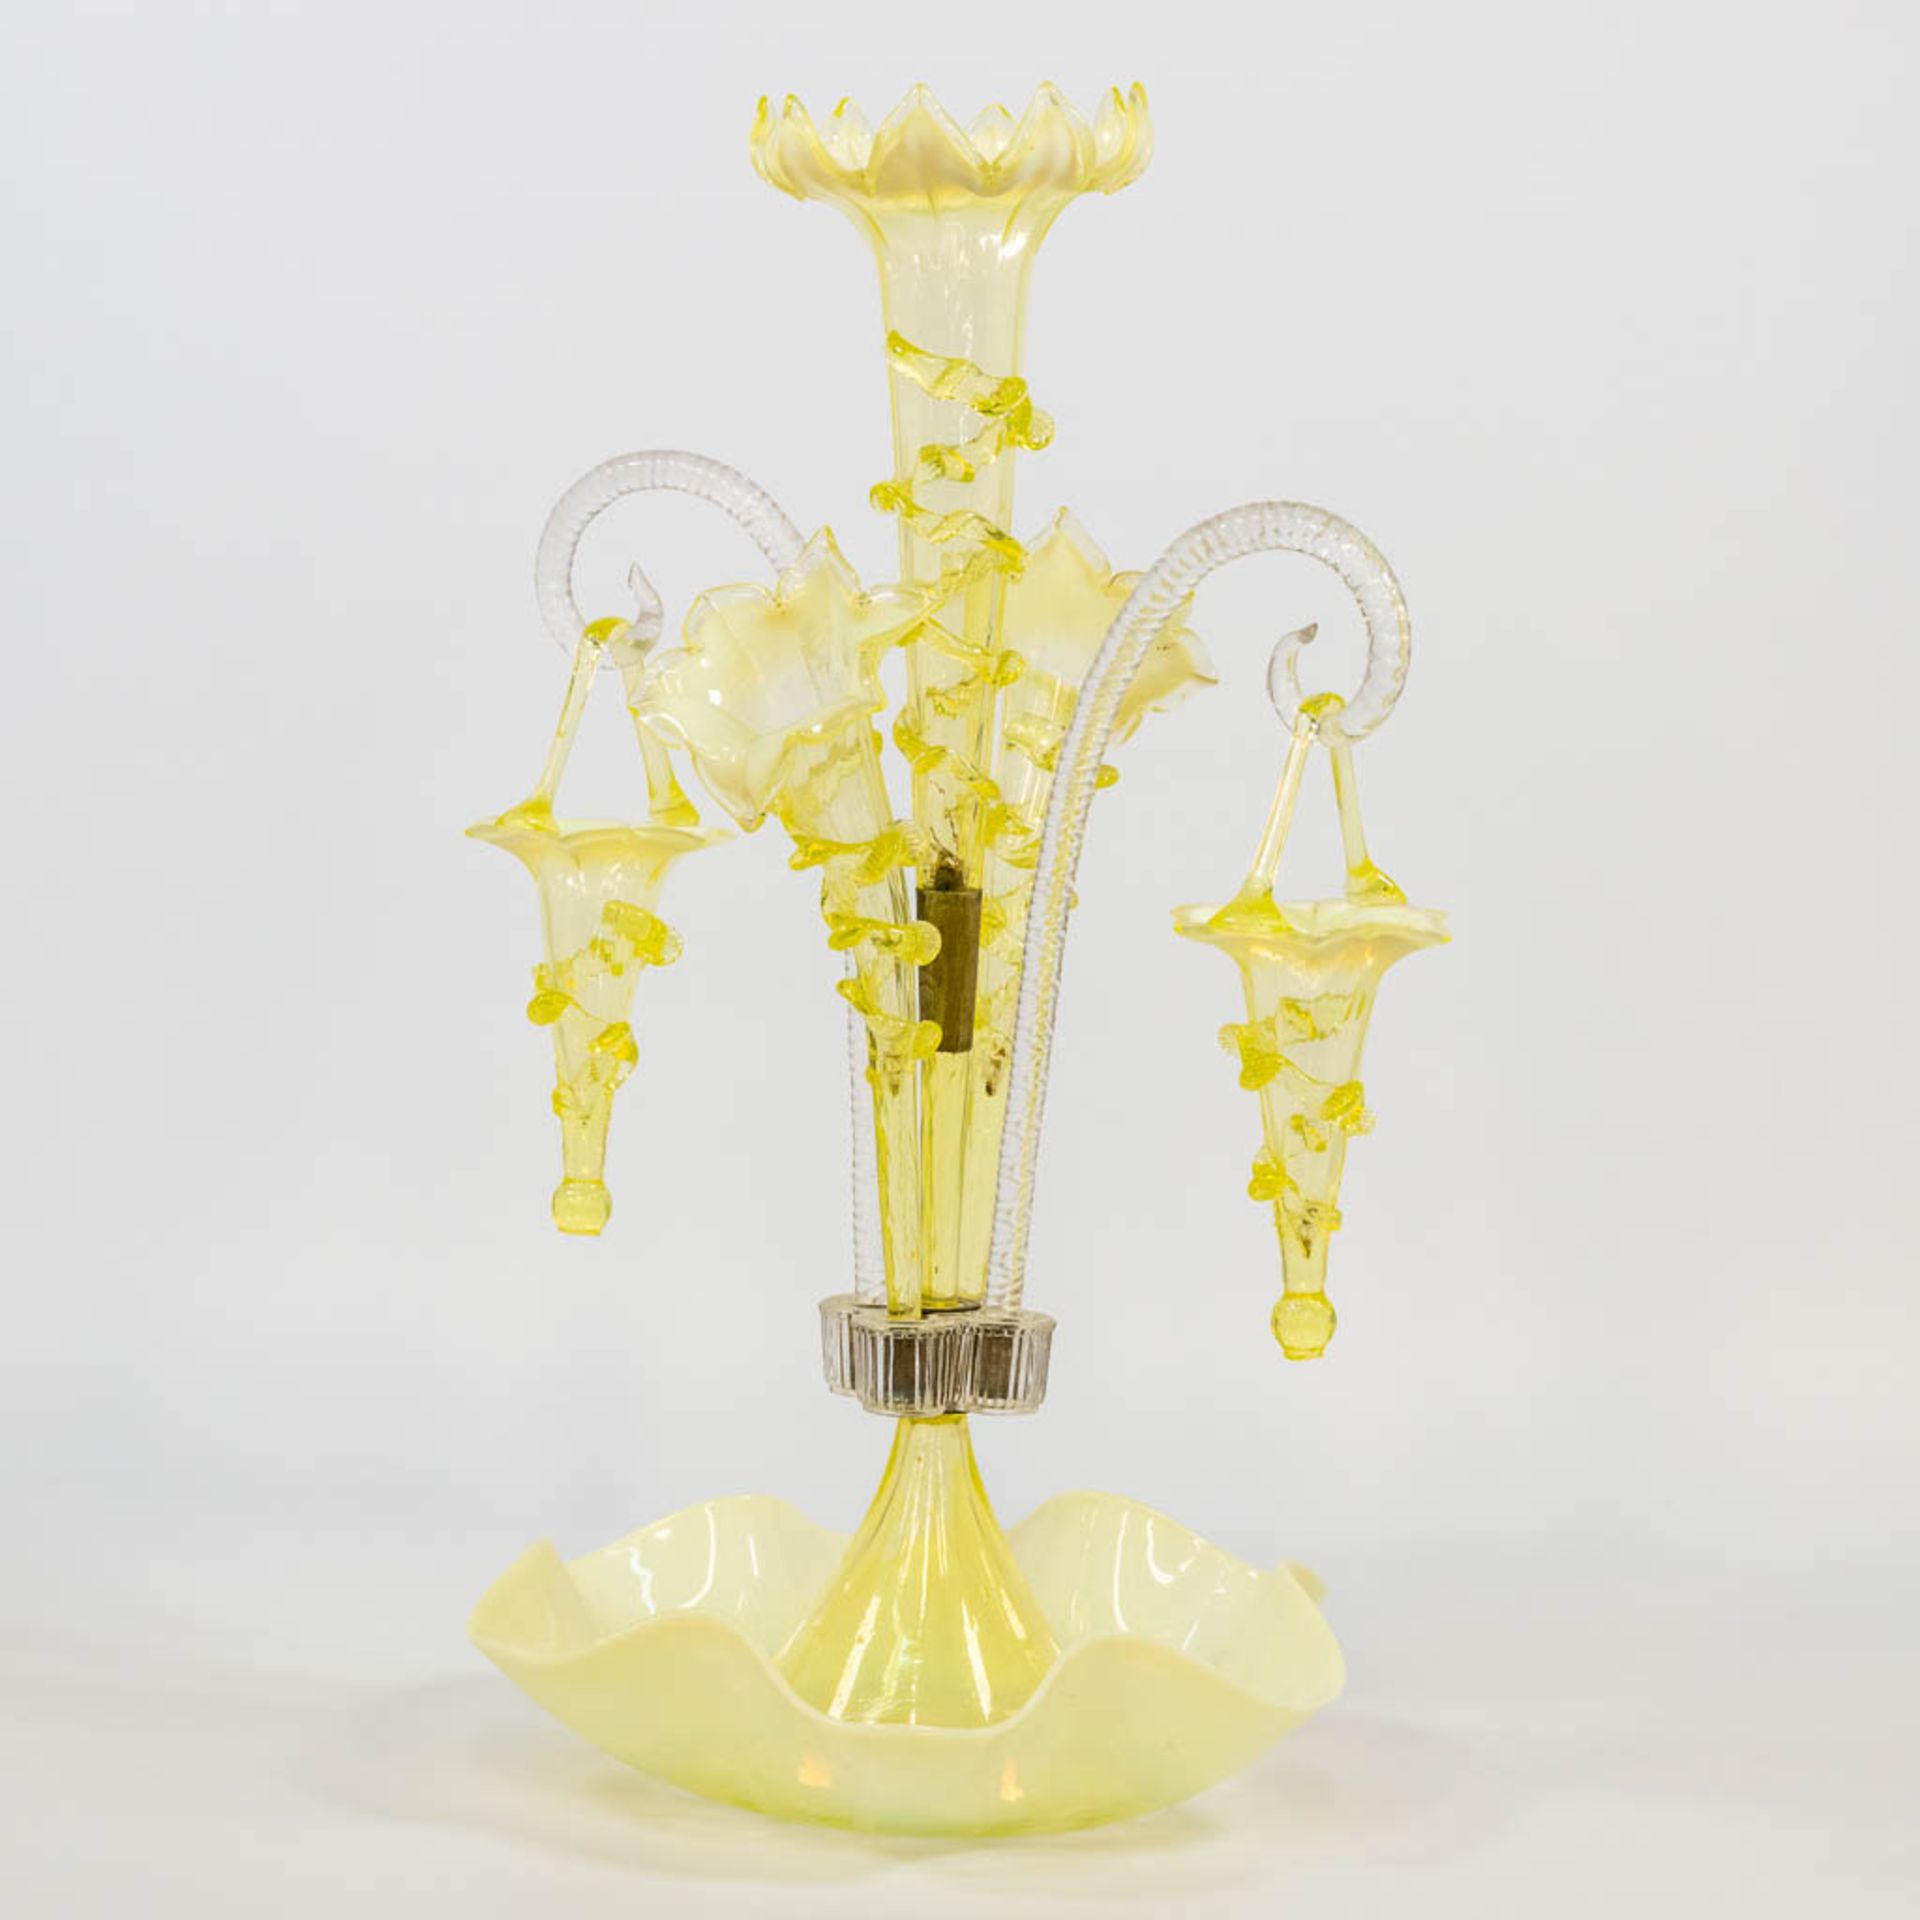 A yellow and clear glass table centrepiece pic-fleur, made in Murano, Italy. (25 x 28 x 45 cm) - Bild 5 aus 15